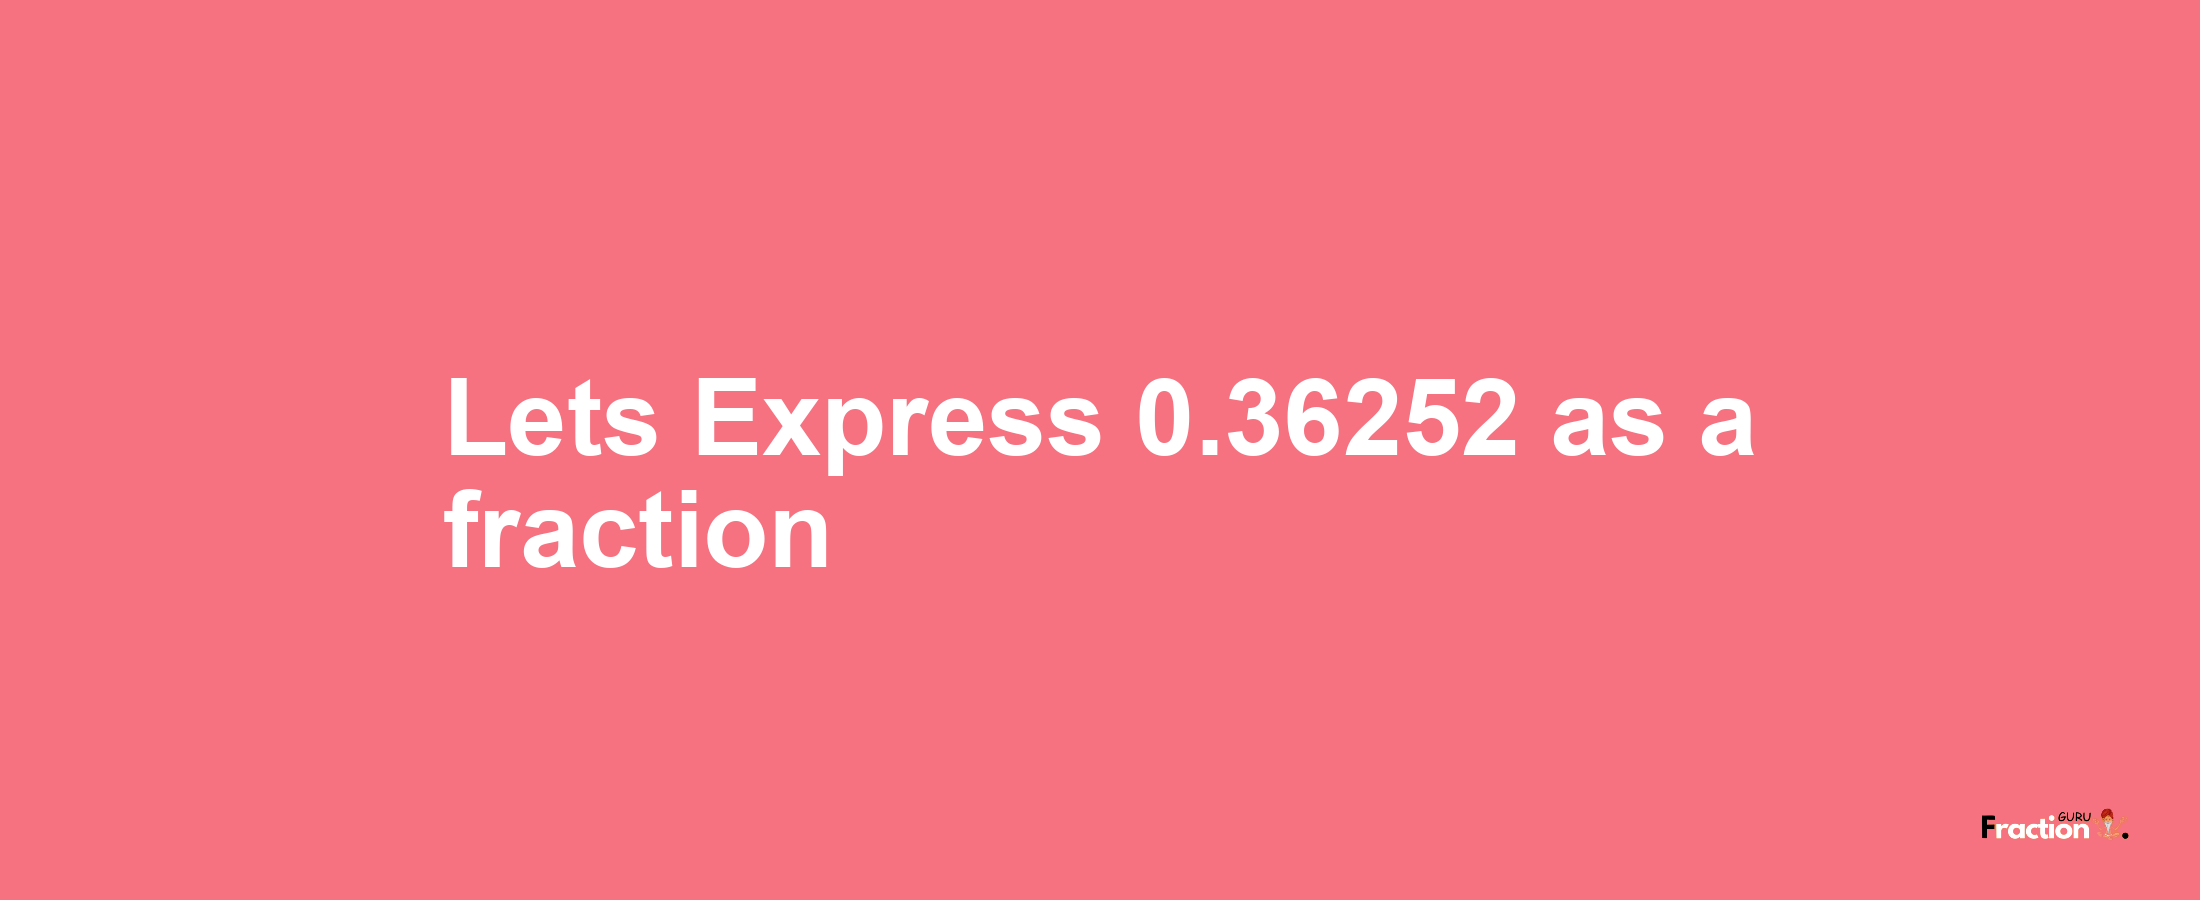 Lets Express 0.36252 as afraction